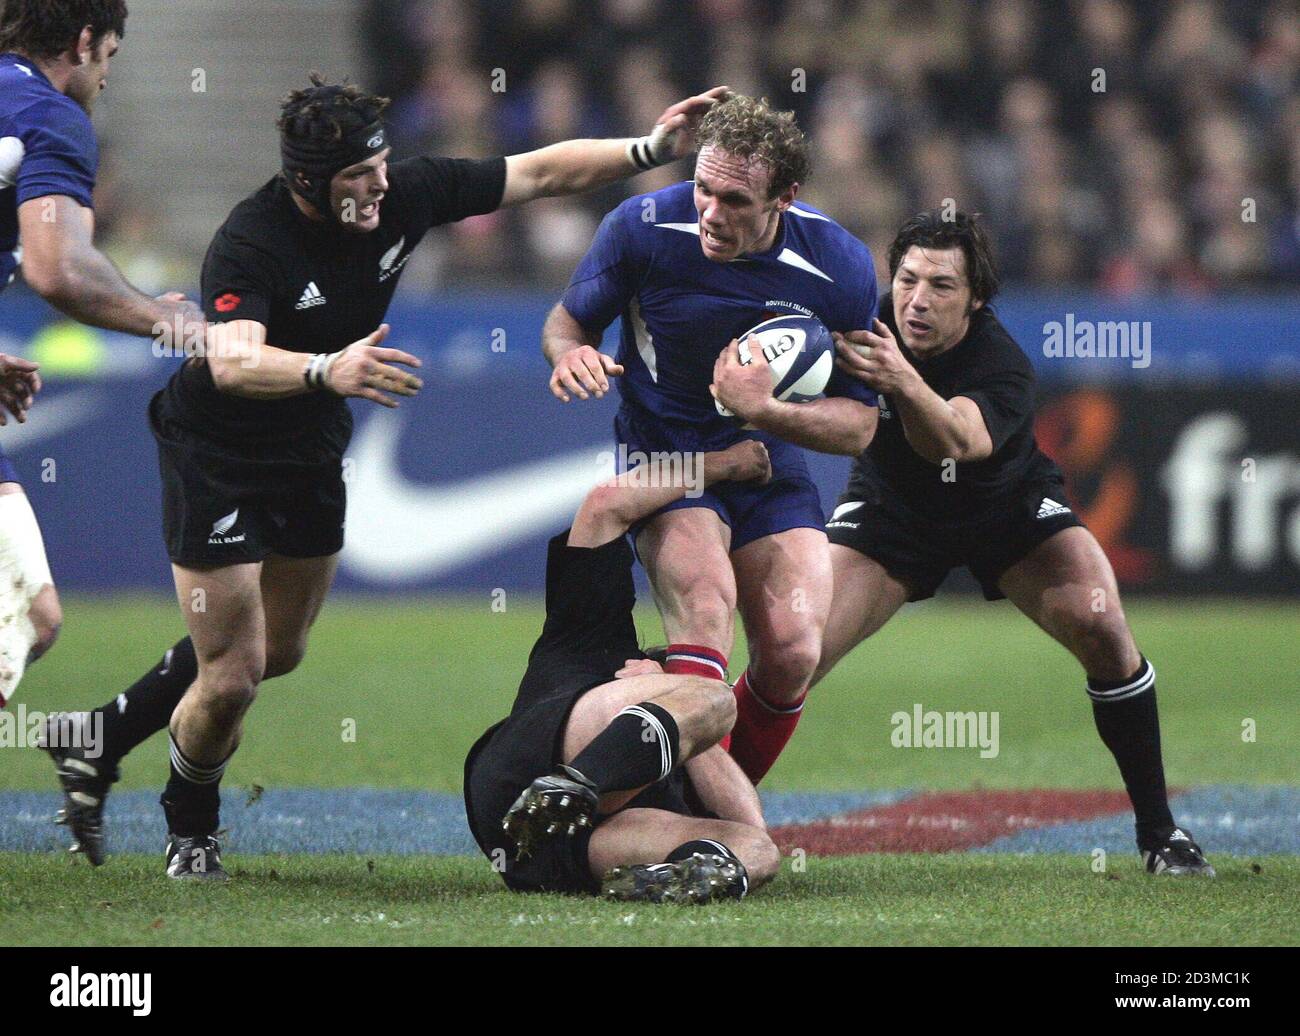 Liebenberg of France is tackled by All Blacks Kelleher and McCaw during  their rugby test match at the Saint-Denis Stade de France. Brian Liebenberg  of France (C) is tackled by All Blacks